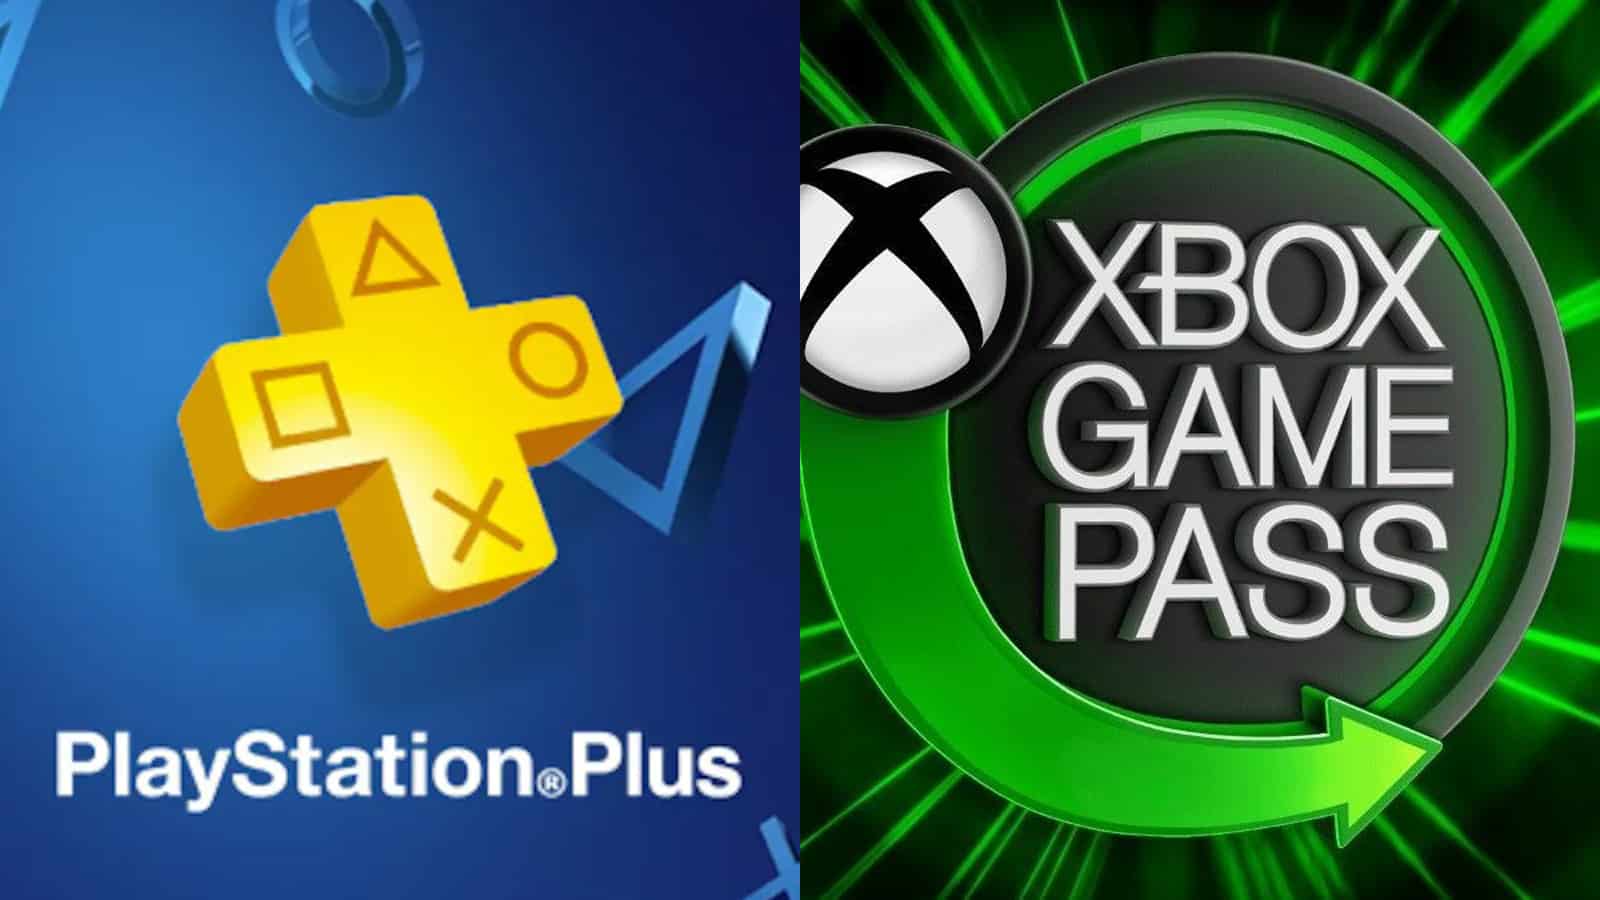 An image of PS Plus and Xbox Game Pass